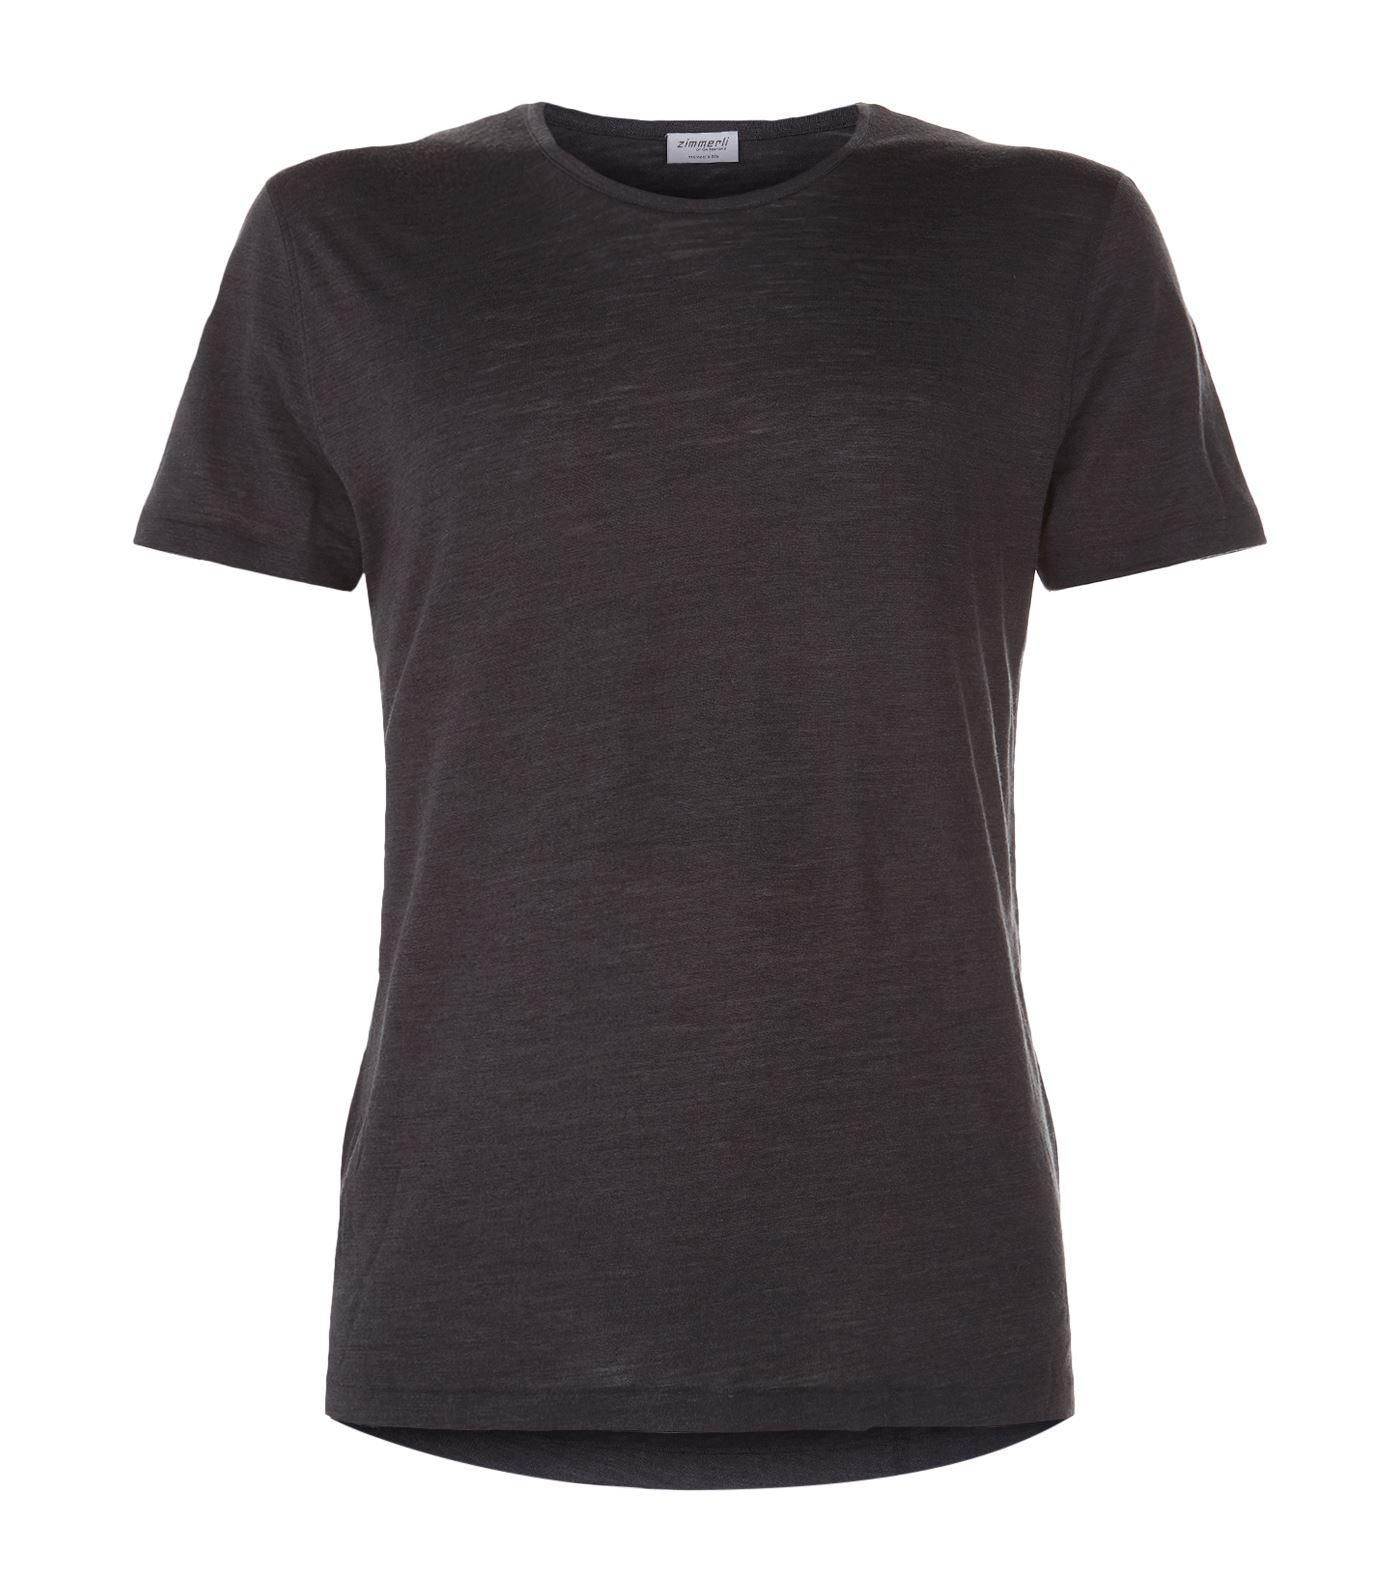 Zimmerli Wool Thermal T-shirt in Grey (Gray) for Men - Lyst